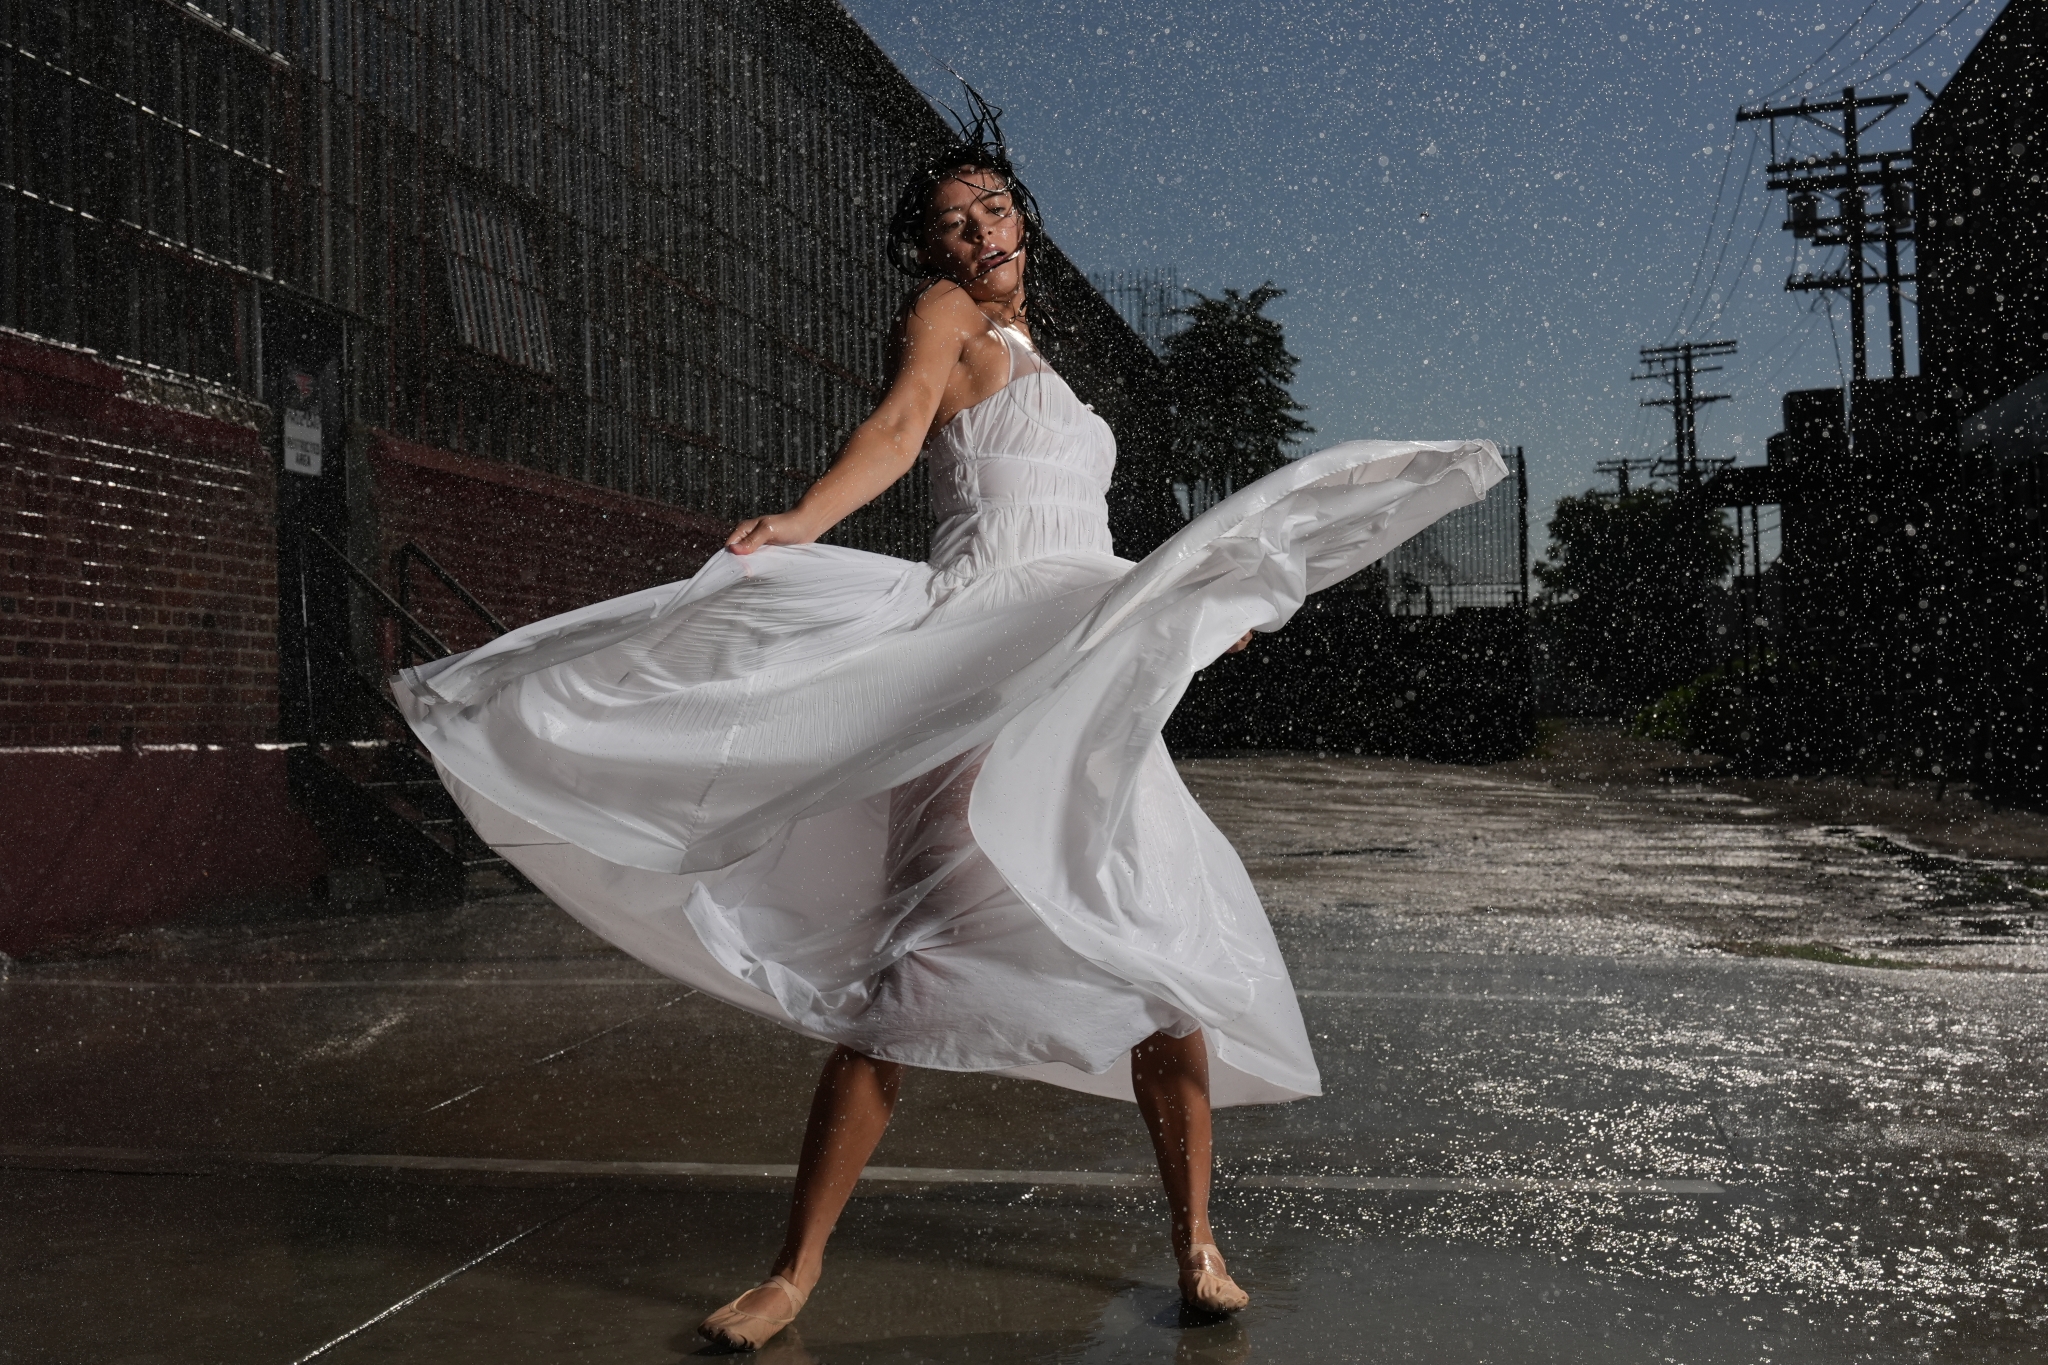 Female dancer in a white dress dancing in the rain, shot with flash synchronisation